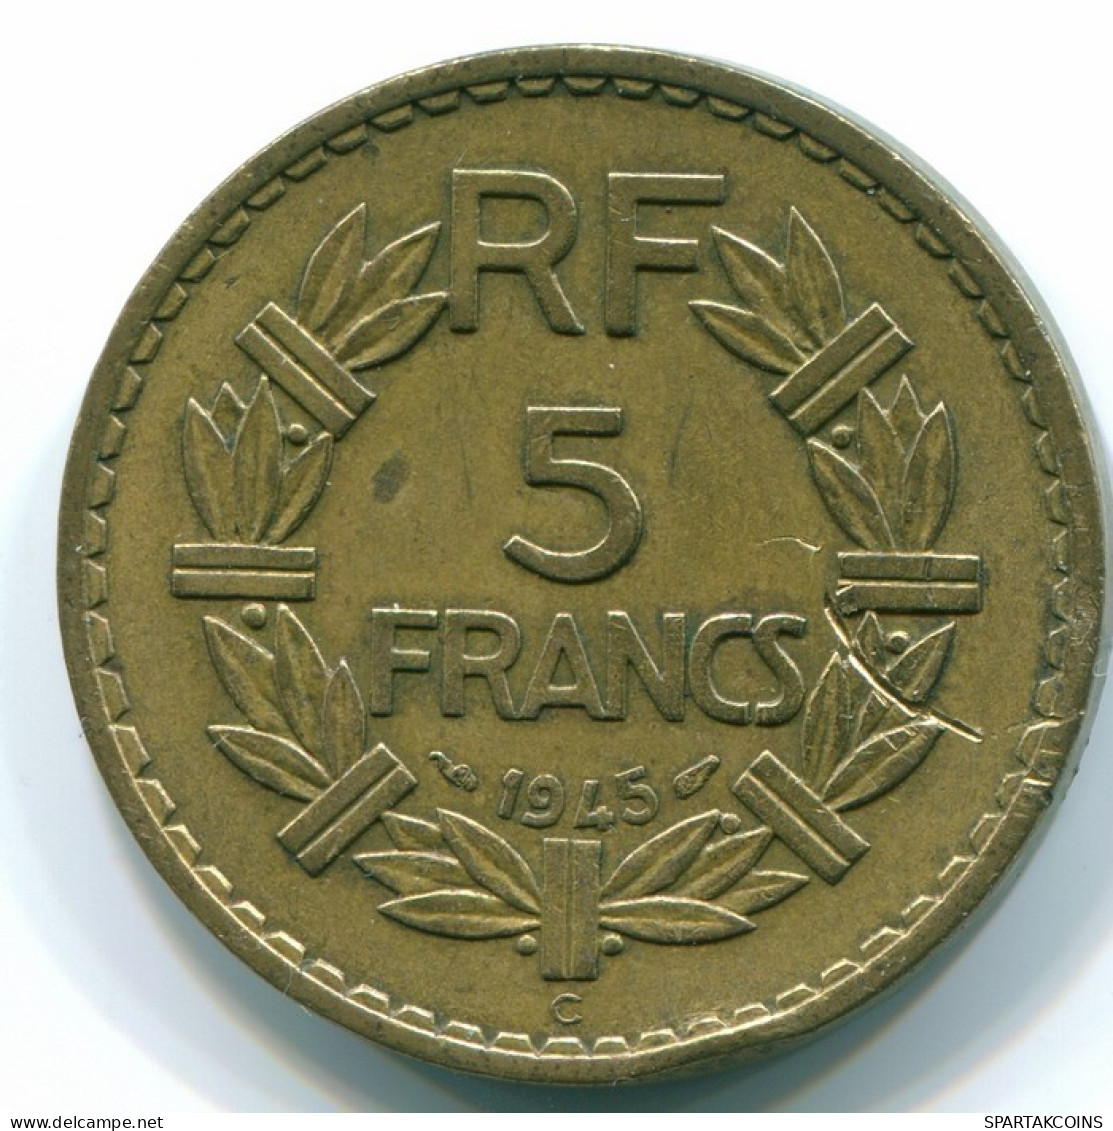 5 FRANCS 1945 FRANKREICH COLONIAL FOR USE IN AFRICA Lavrillier VF+ #FR1019.29.D.A - 5 Francs